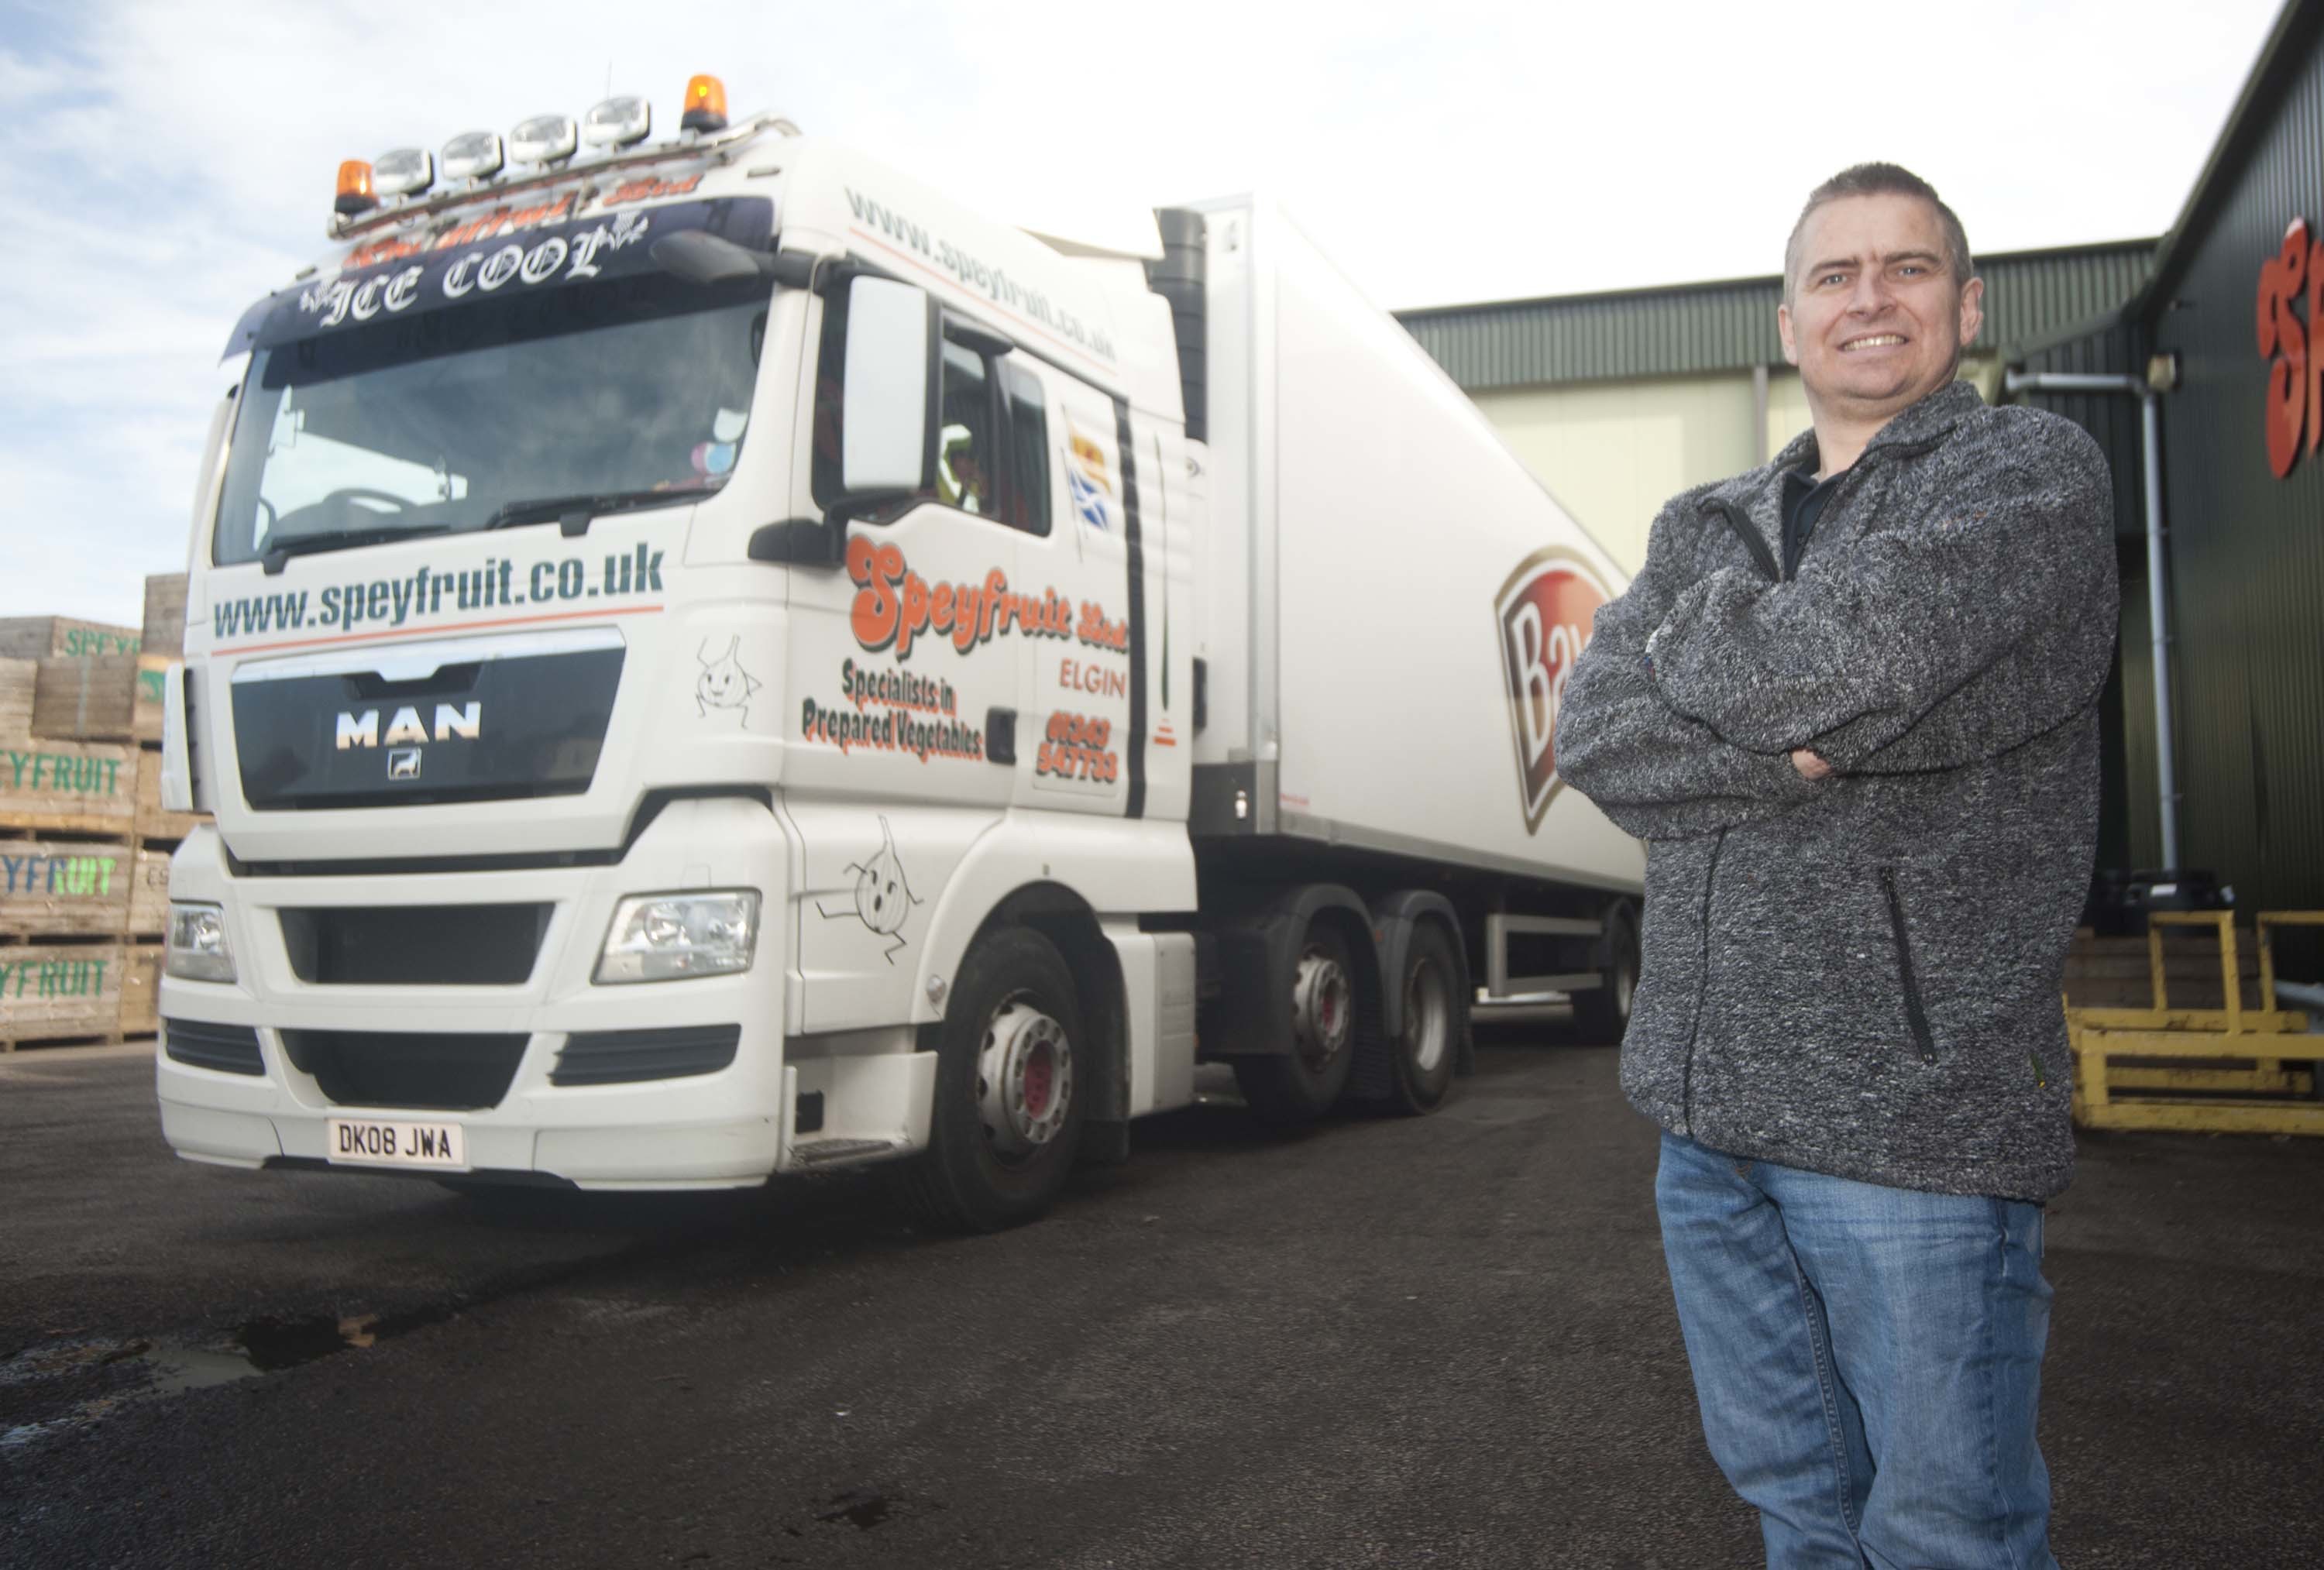 Richard Heaney has returned to work at Speyfruit in Elgin, as an HGV driver following a heart transplant last year.